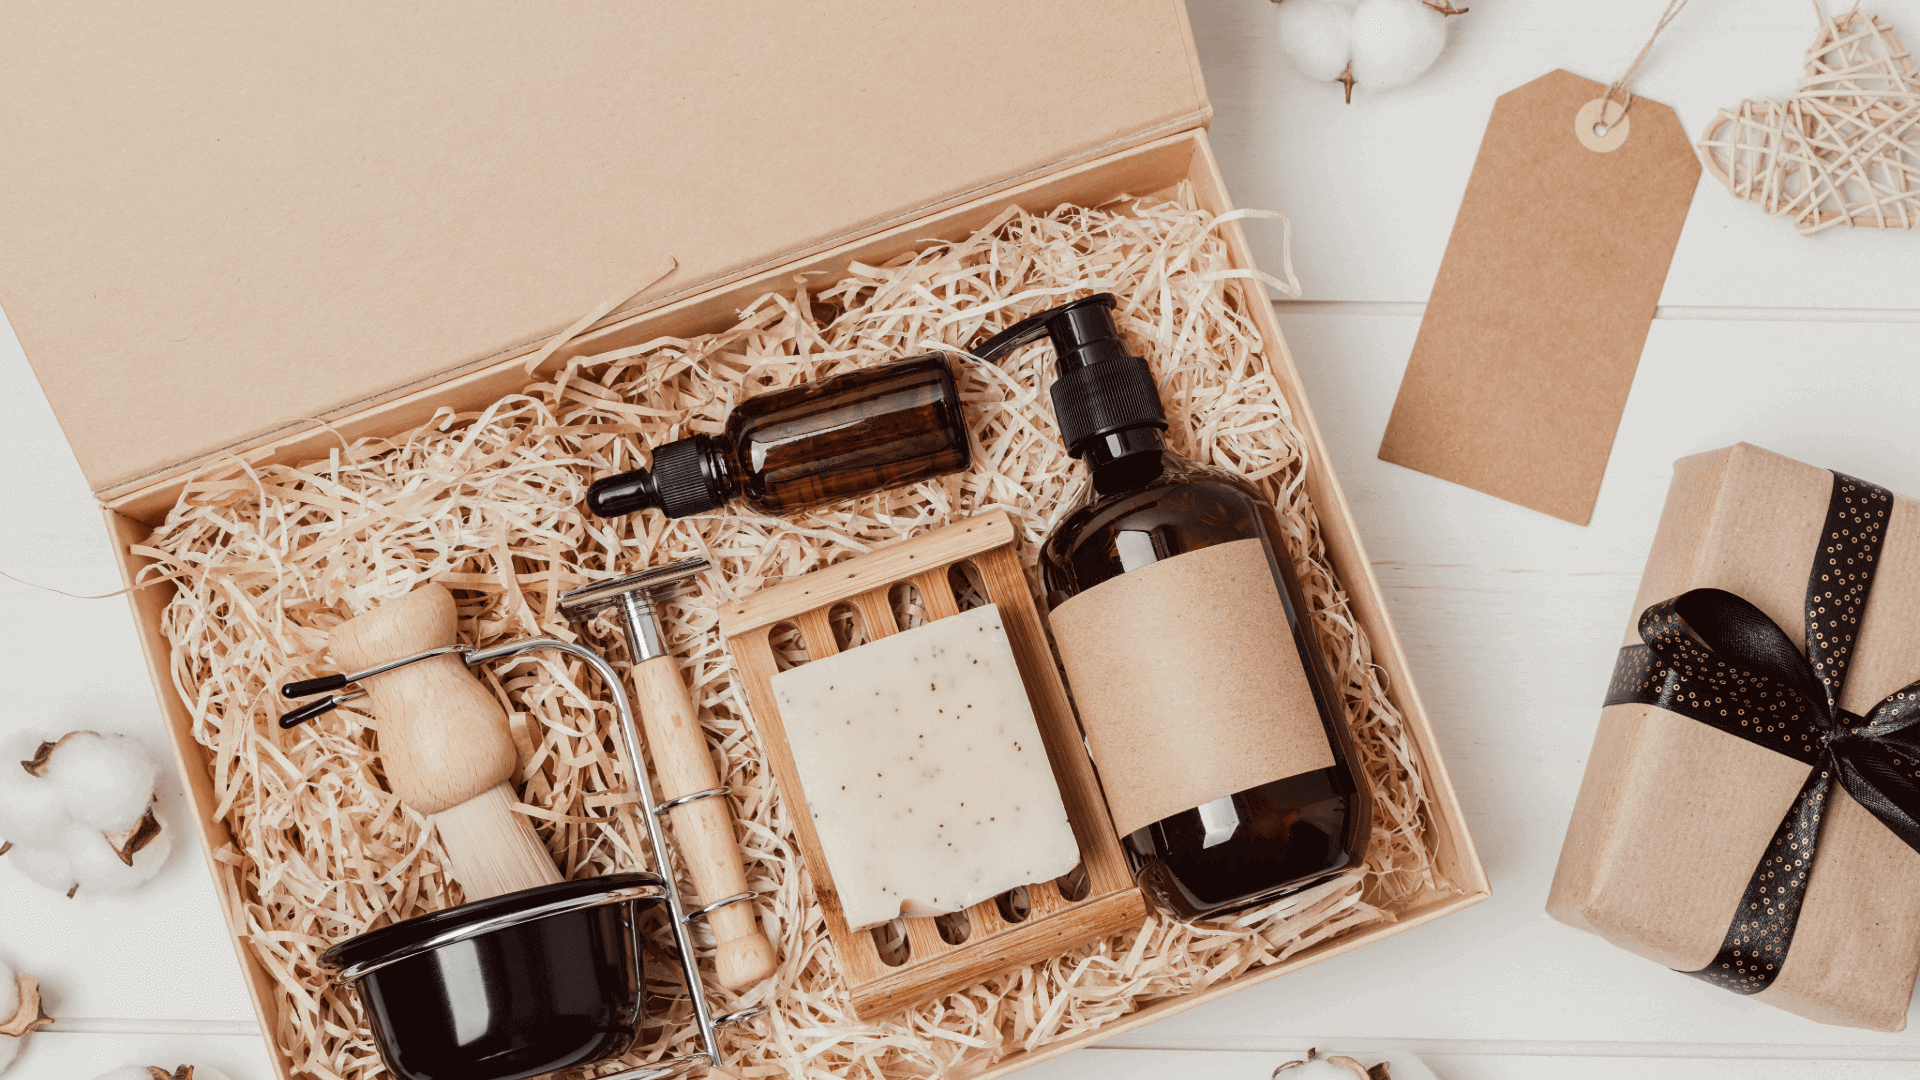 Kit packaging solutions for beauty products